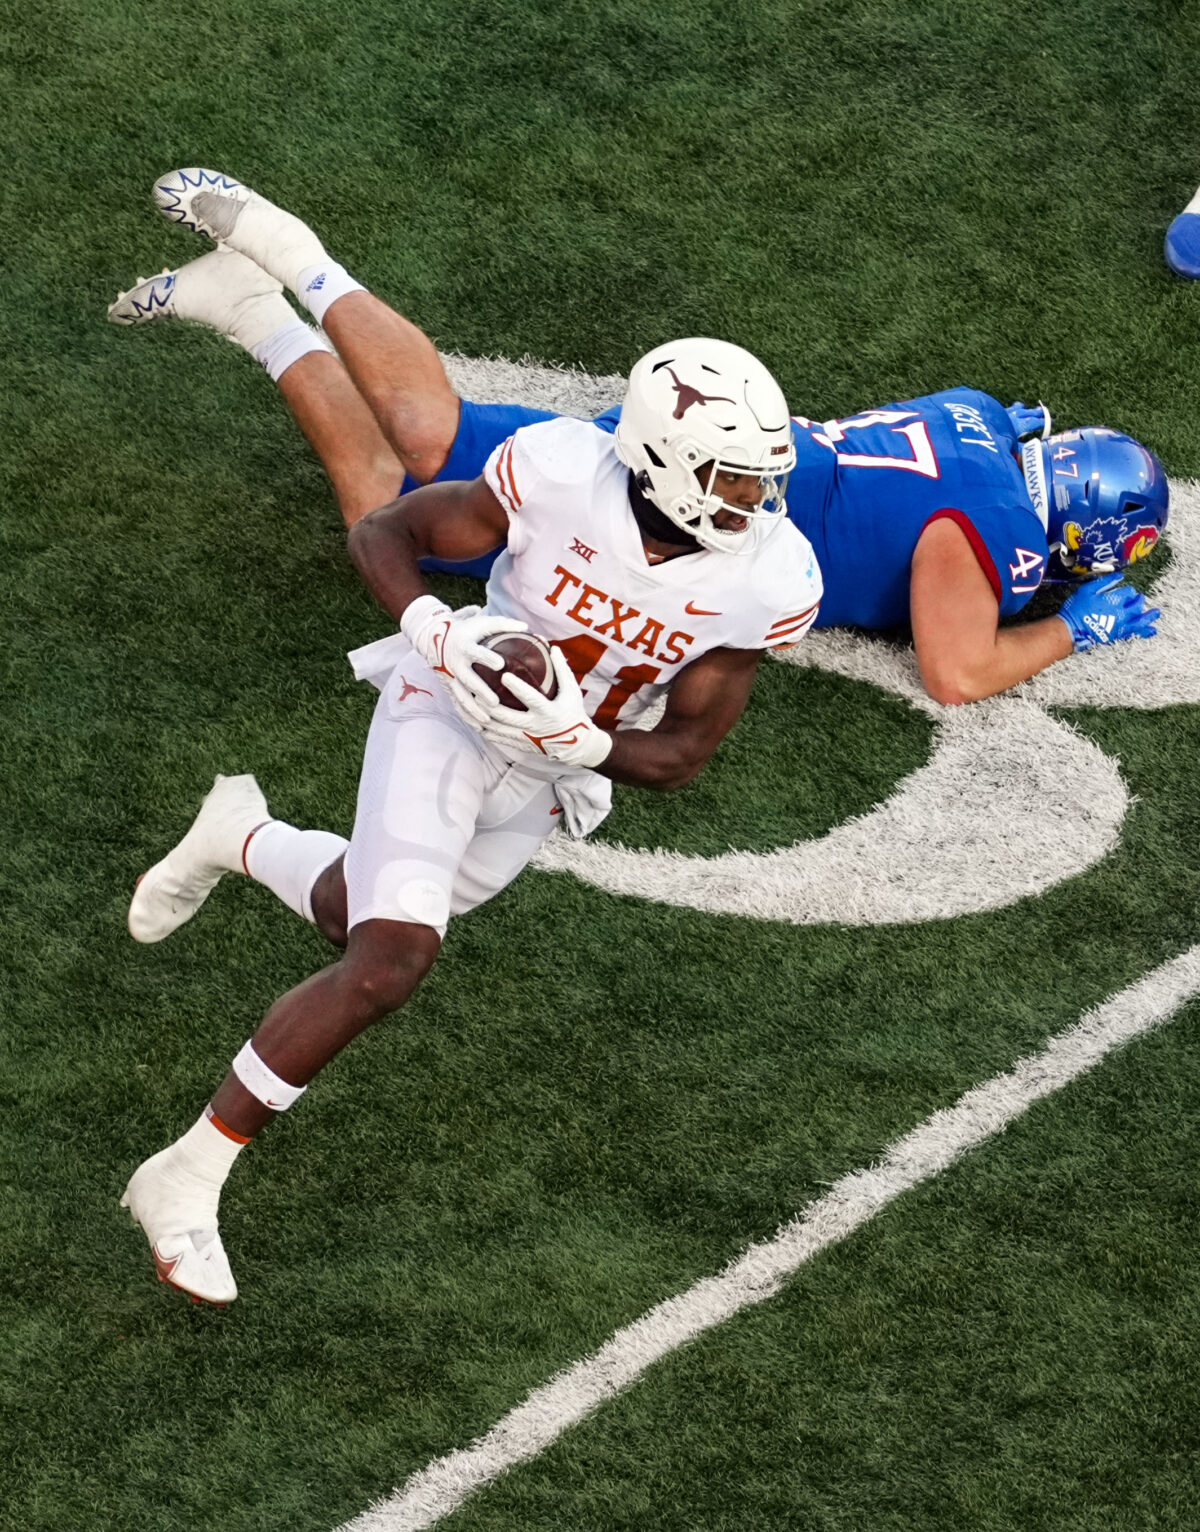 Social media reacts to Texas LB Jaylan Ford being snubbed by Big 12 coaches